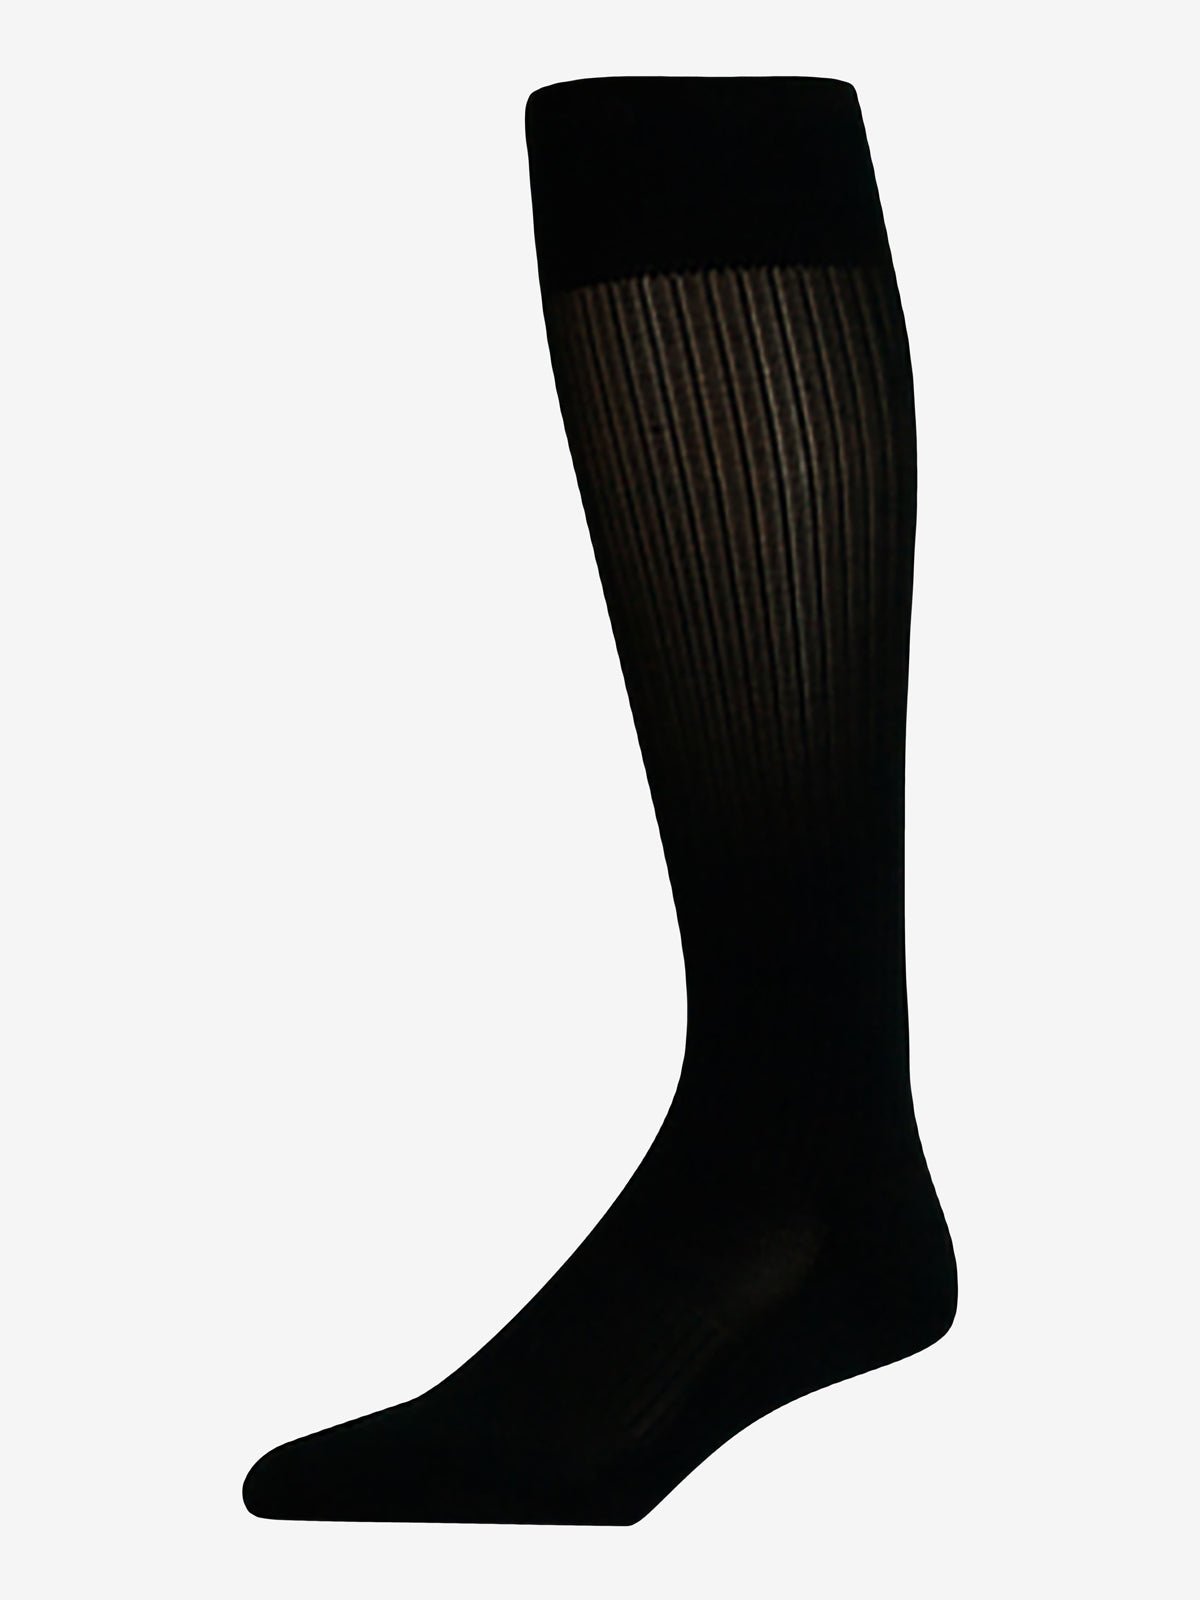 Insect Repellent Compression Socks | Repel Ticks, Chiggers, Mosquitoes ...